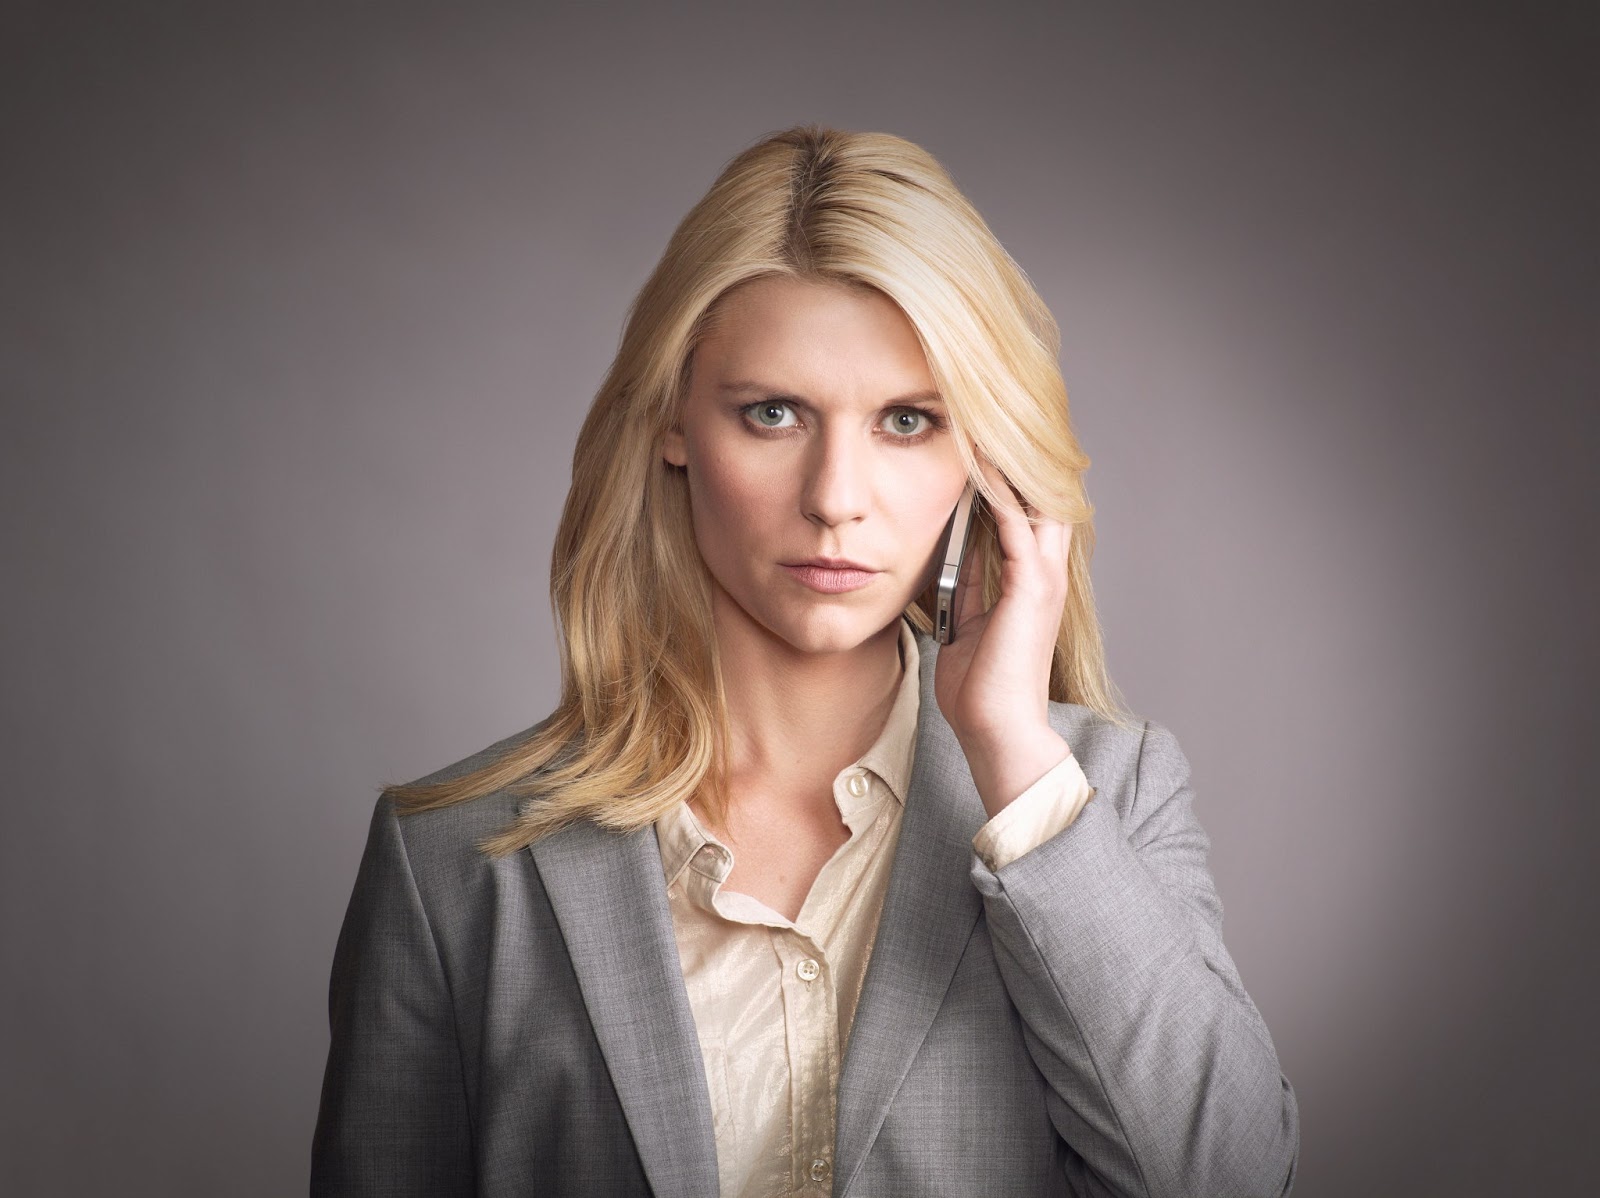 Aboutnicigiri Claire Danes As Carrie Mathison On Homeland 